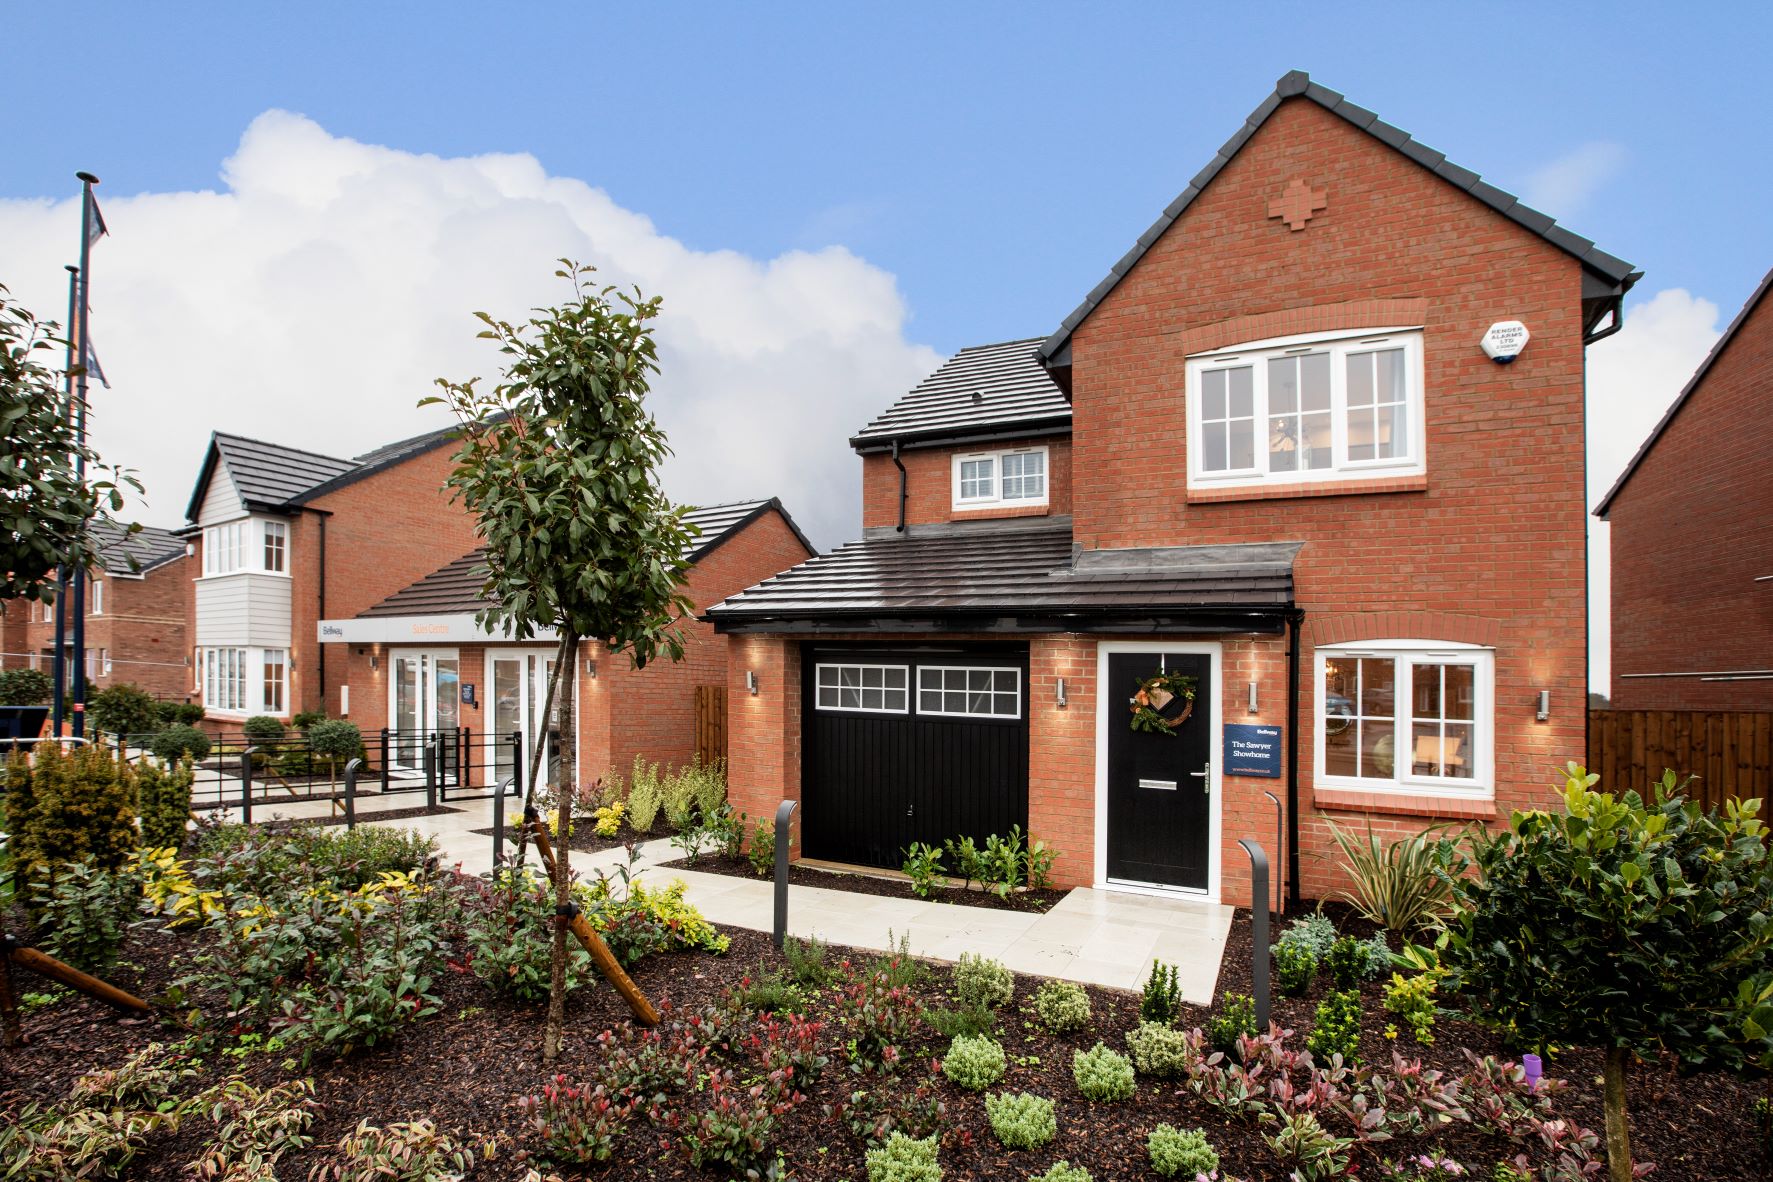 More Than 30 Homes Already Built at New Development in Wingate